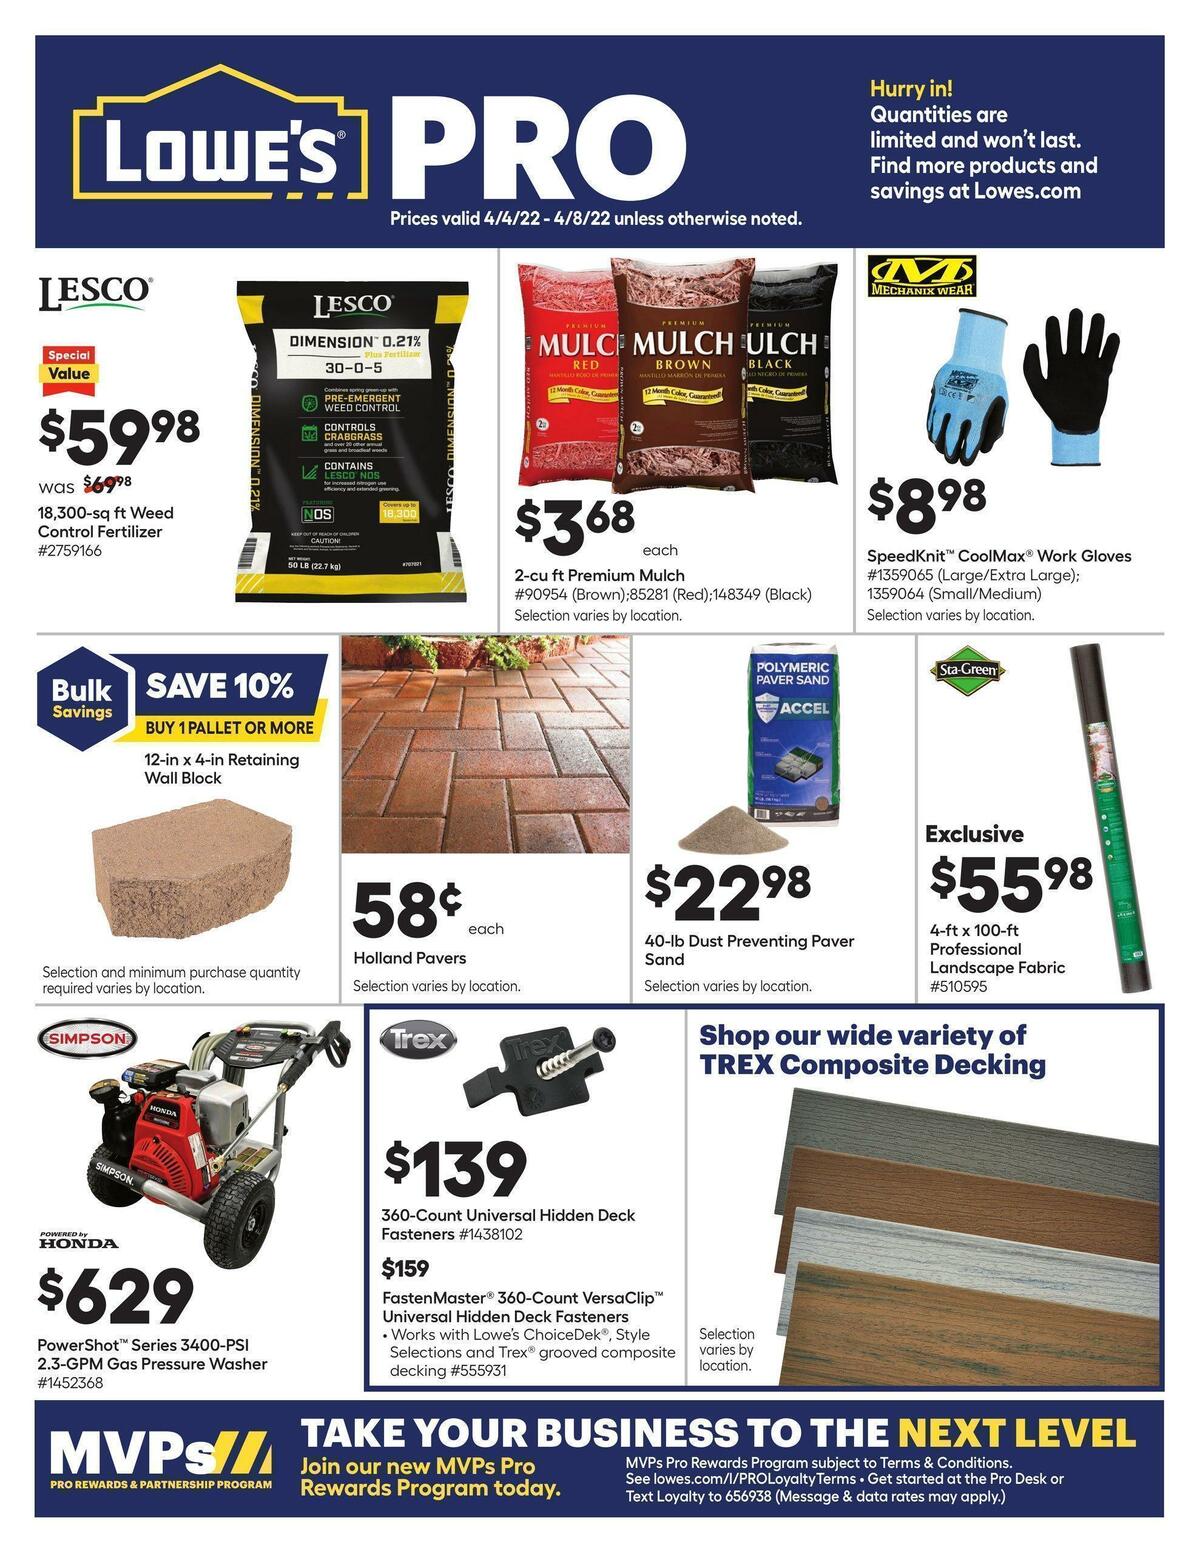 Lowe's Pro Ad Weekly Ad from April 4